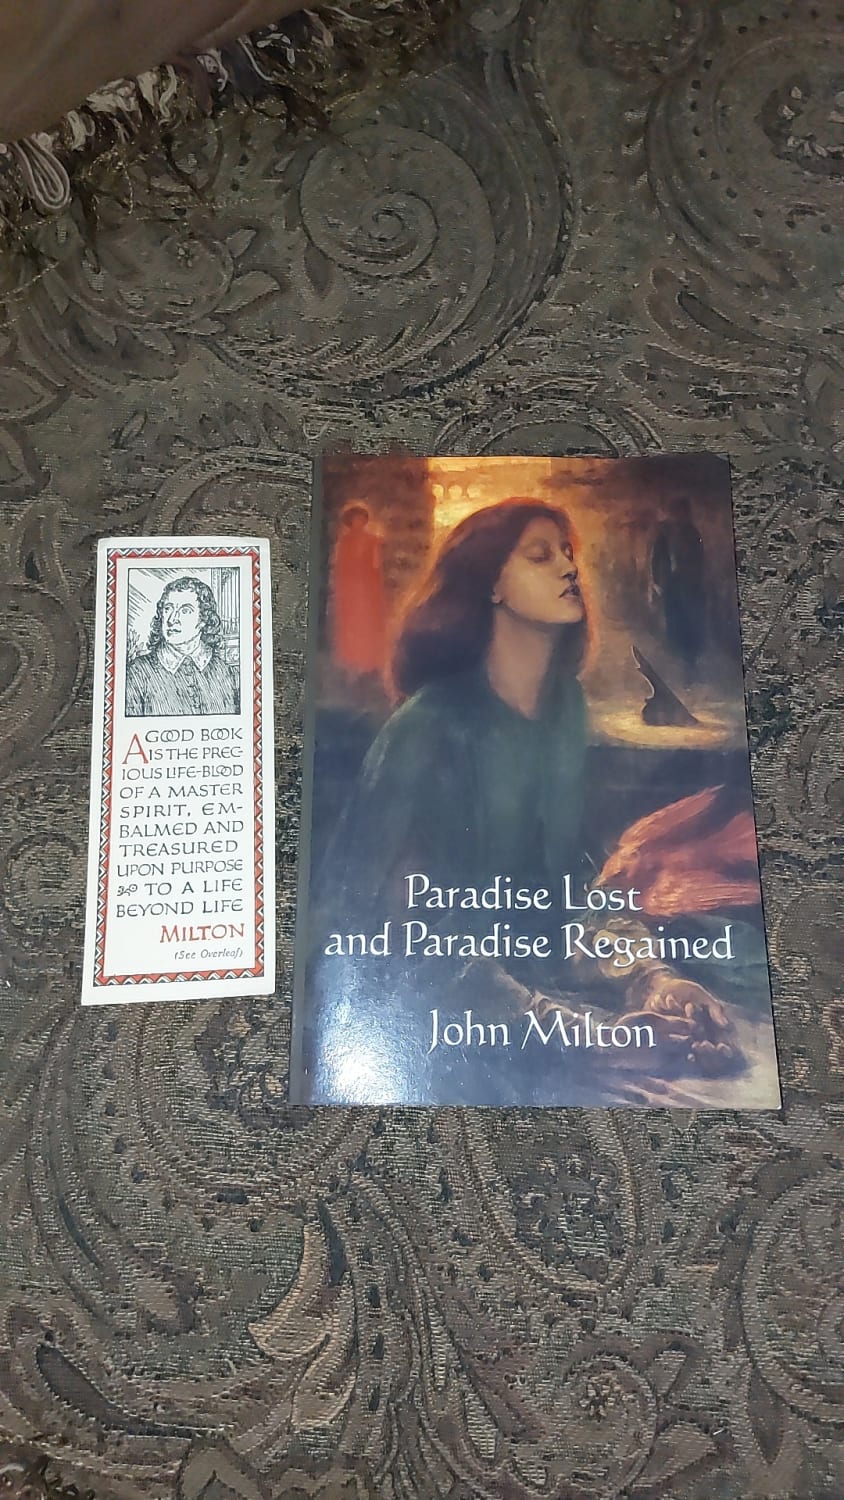 I recieved this in the mail today. Paradise Lost and Paradise Regained - John Milton